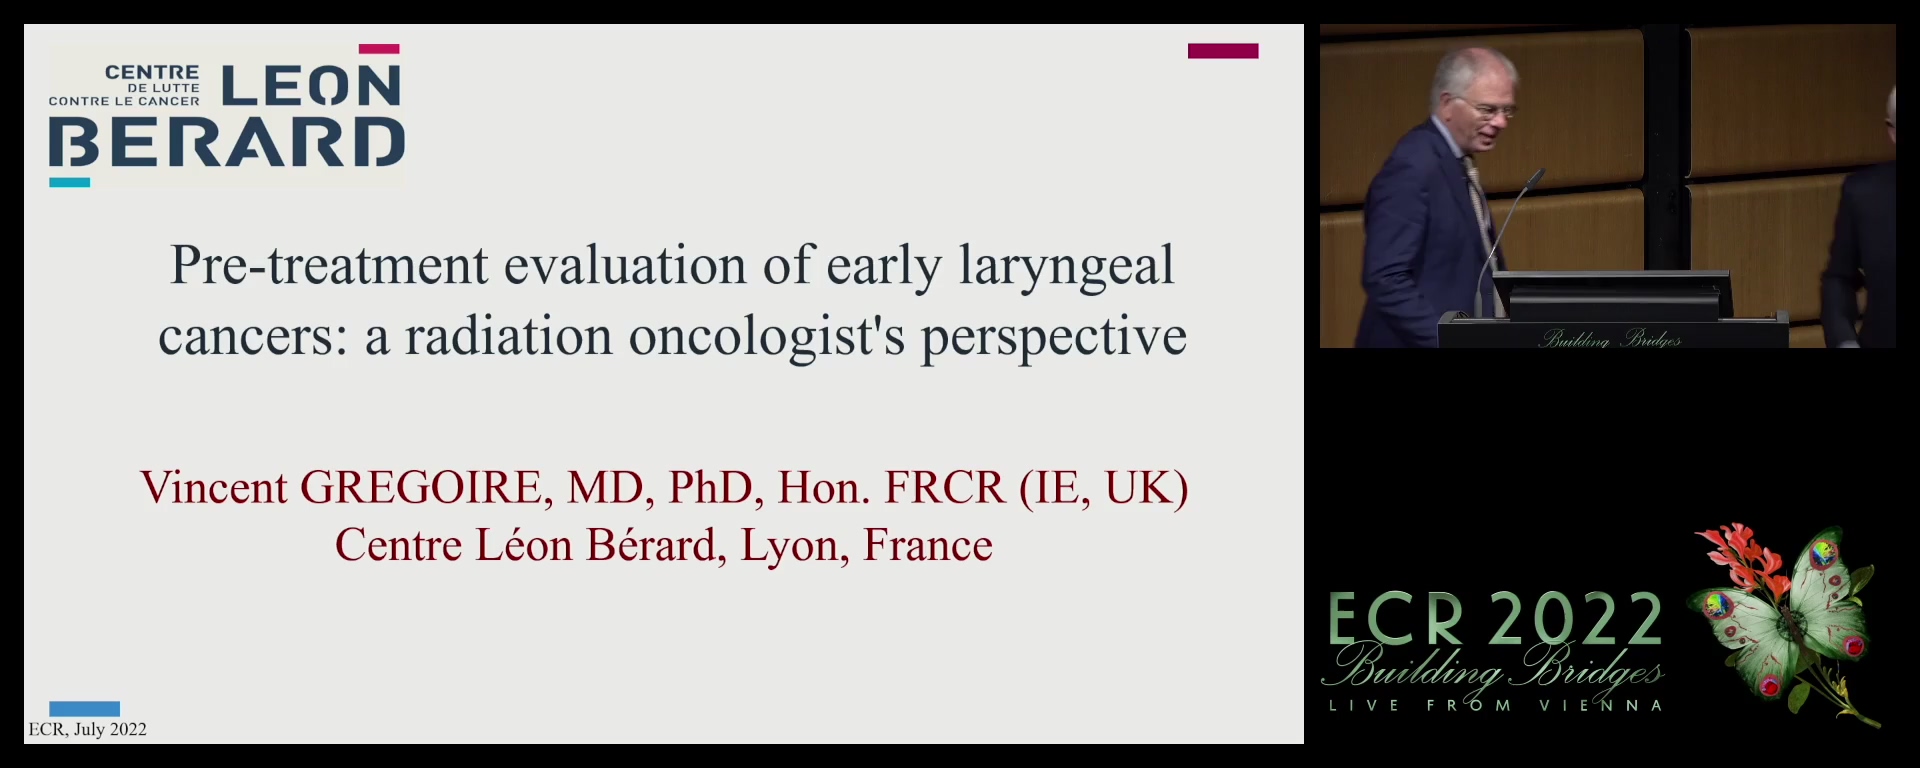 Pre-treatment evaluation of early laryngeal cancers: a radiation oncologist's perspective